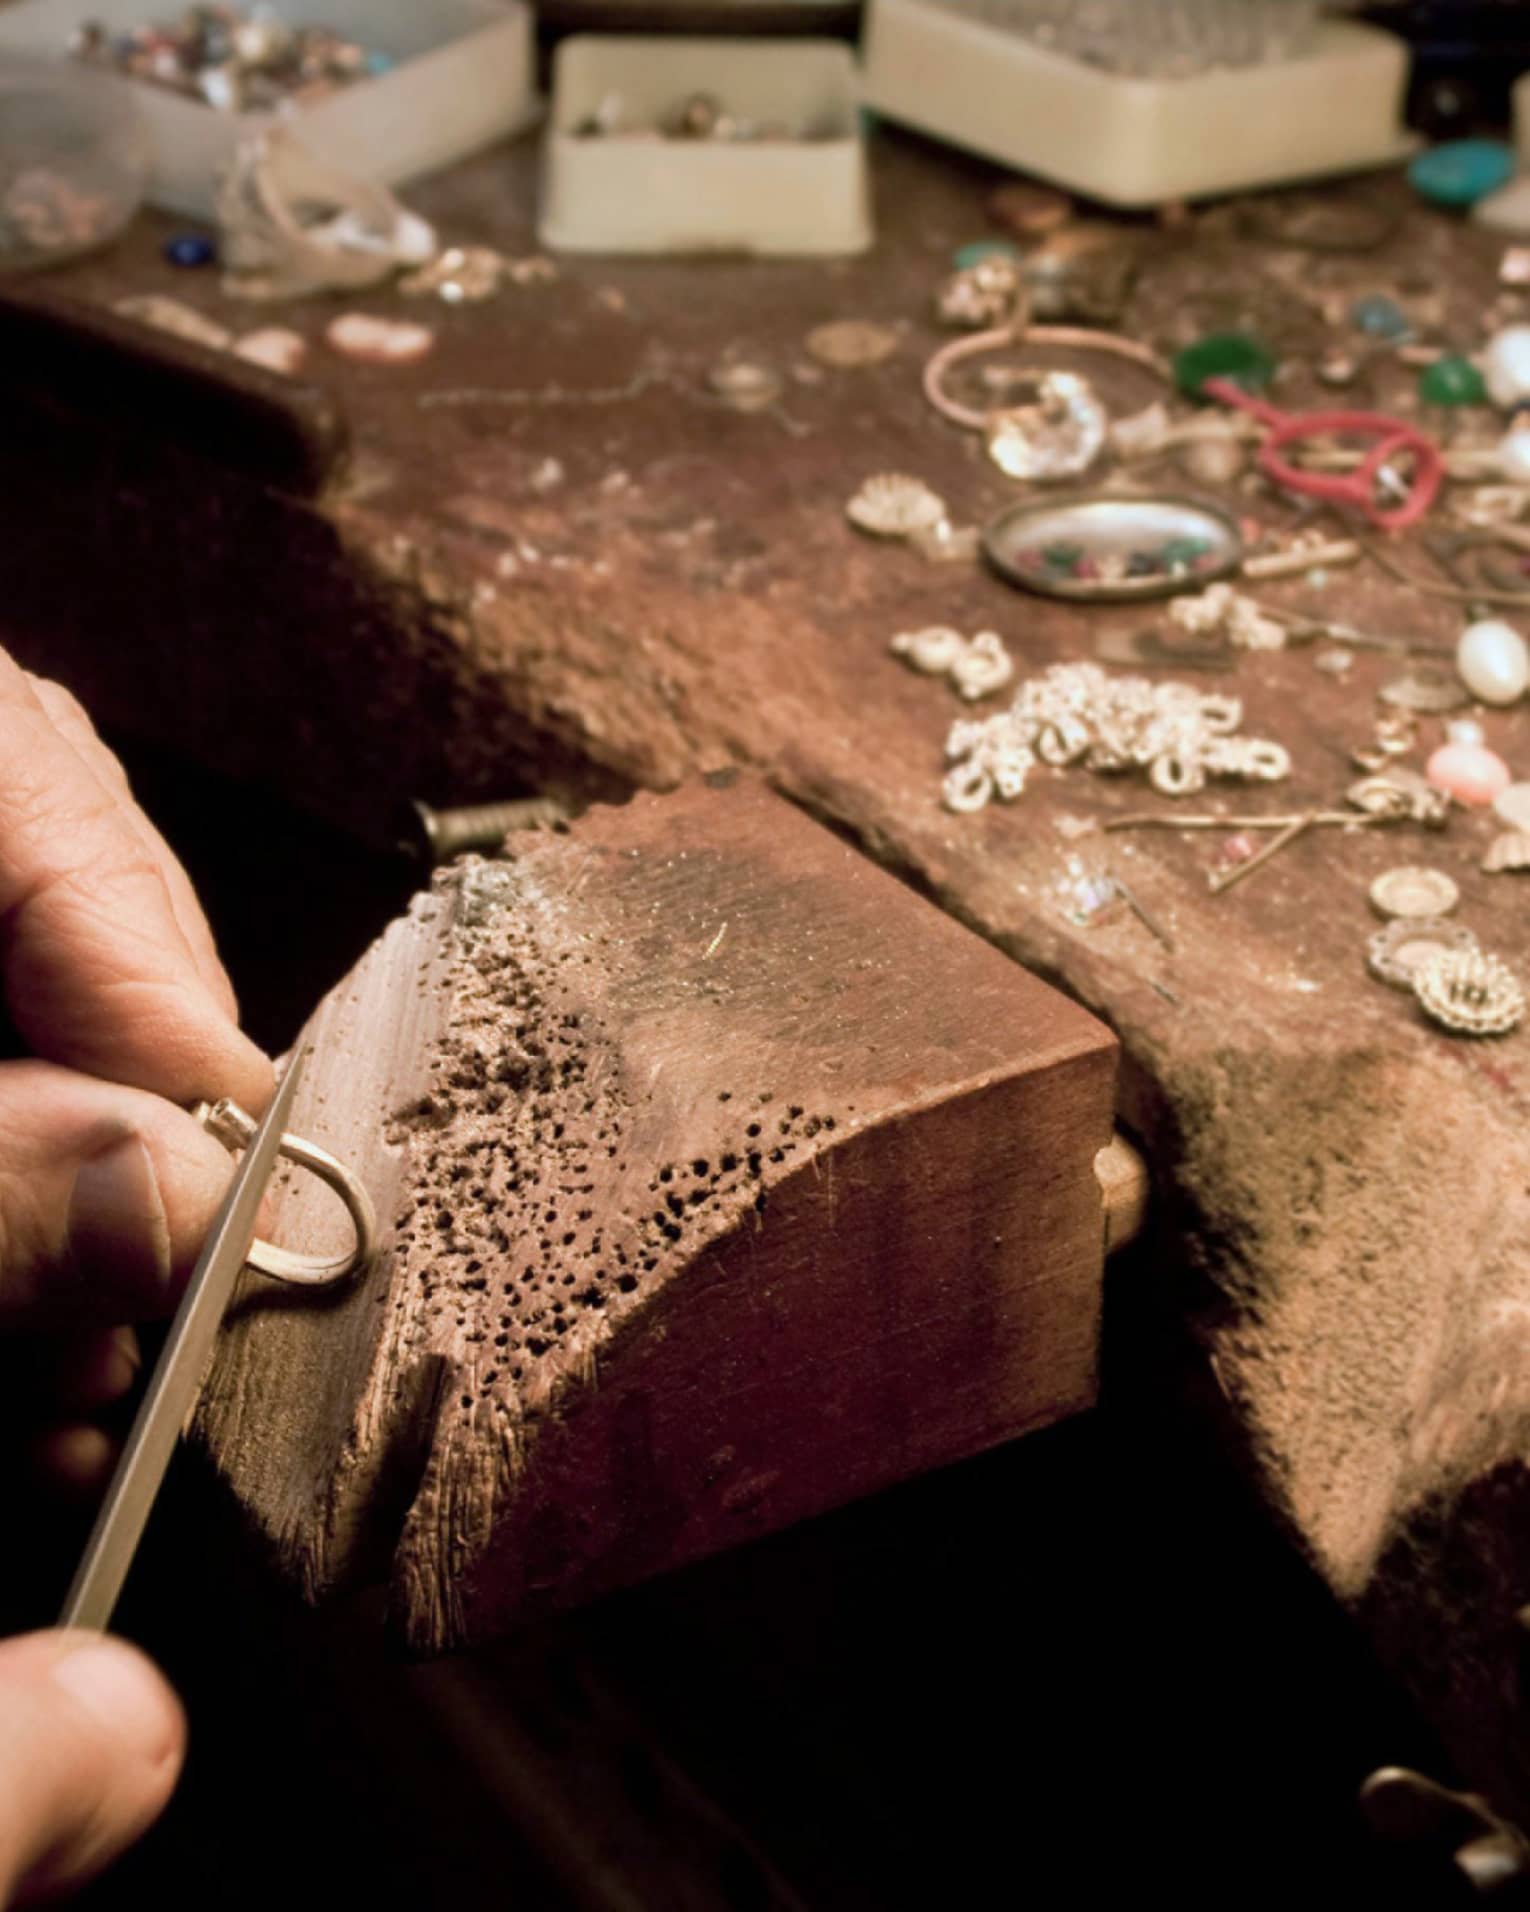 Jeweller's hands using a tool to craft jewellery on a wooden block